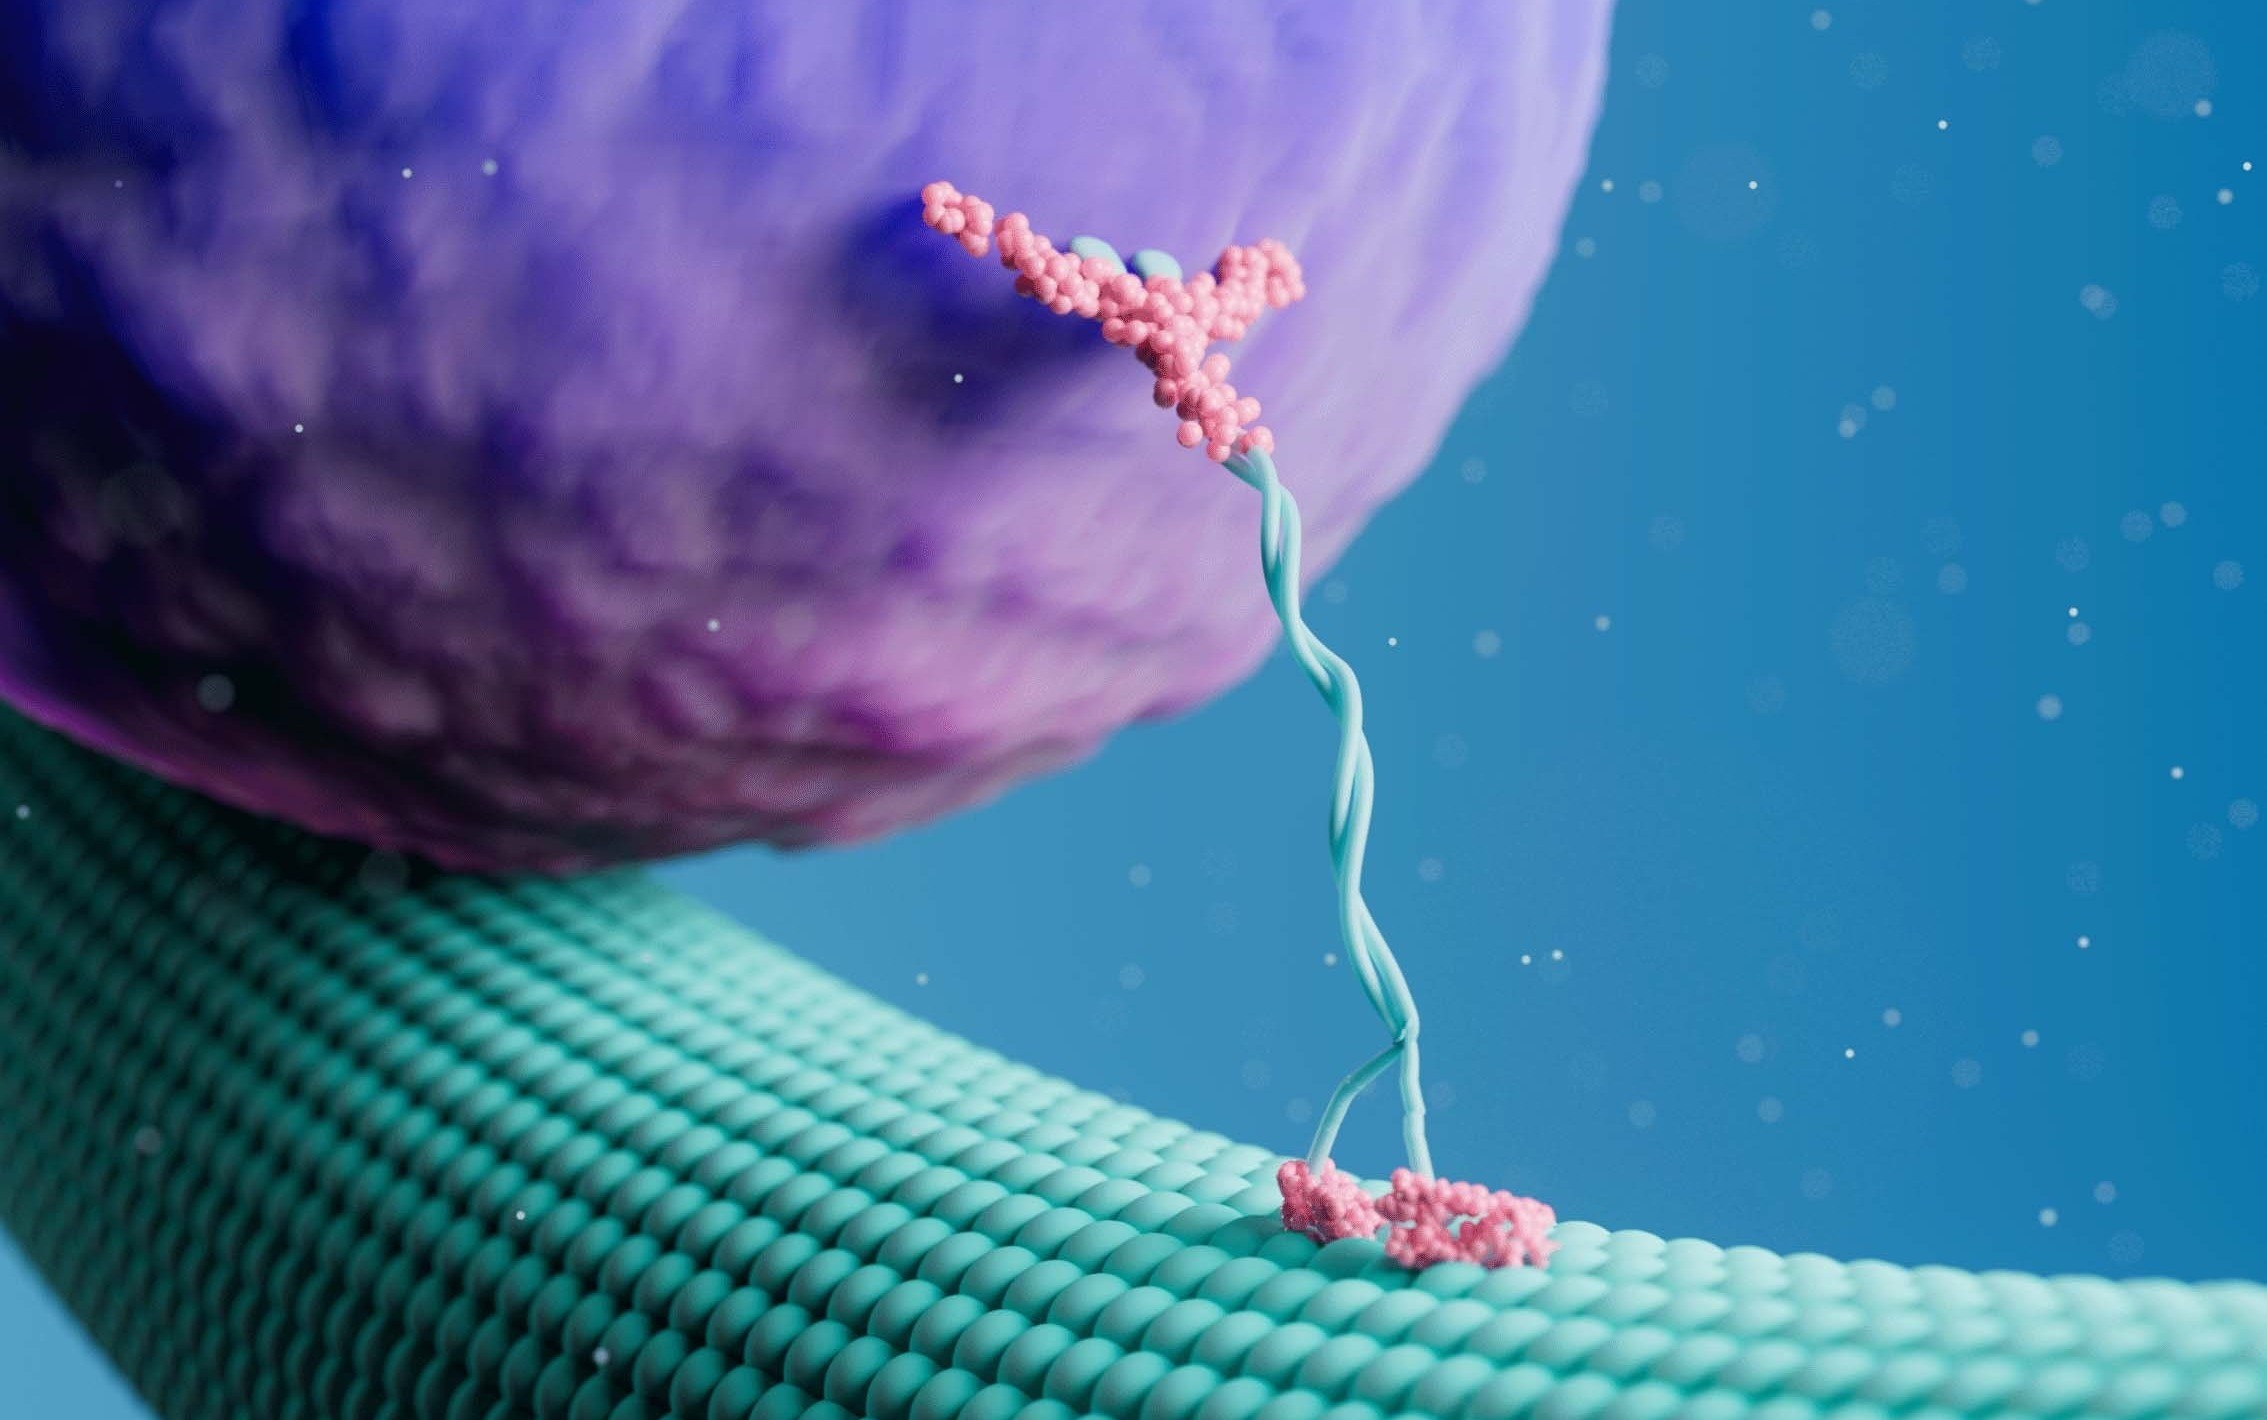 3D animation of Cytoskeleton structure and transport closeup mechanism.jpg